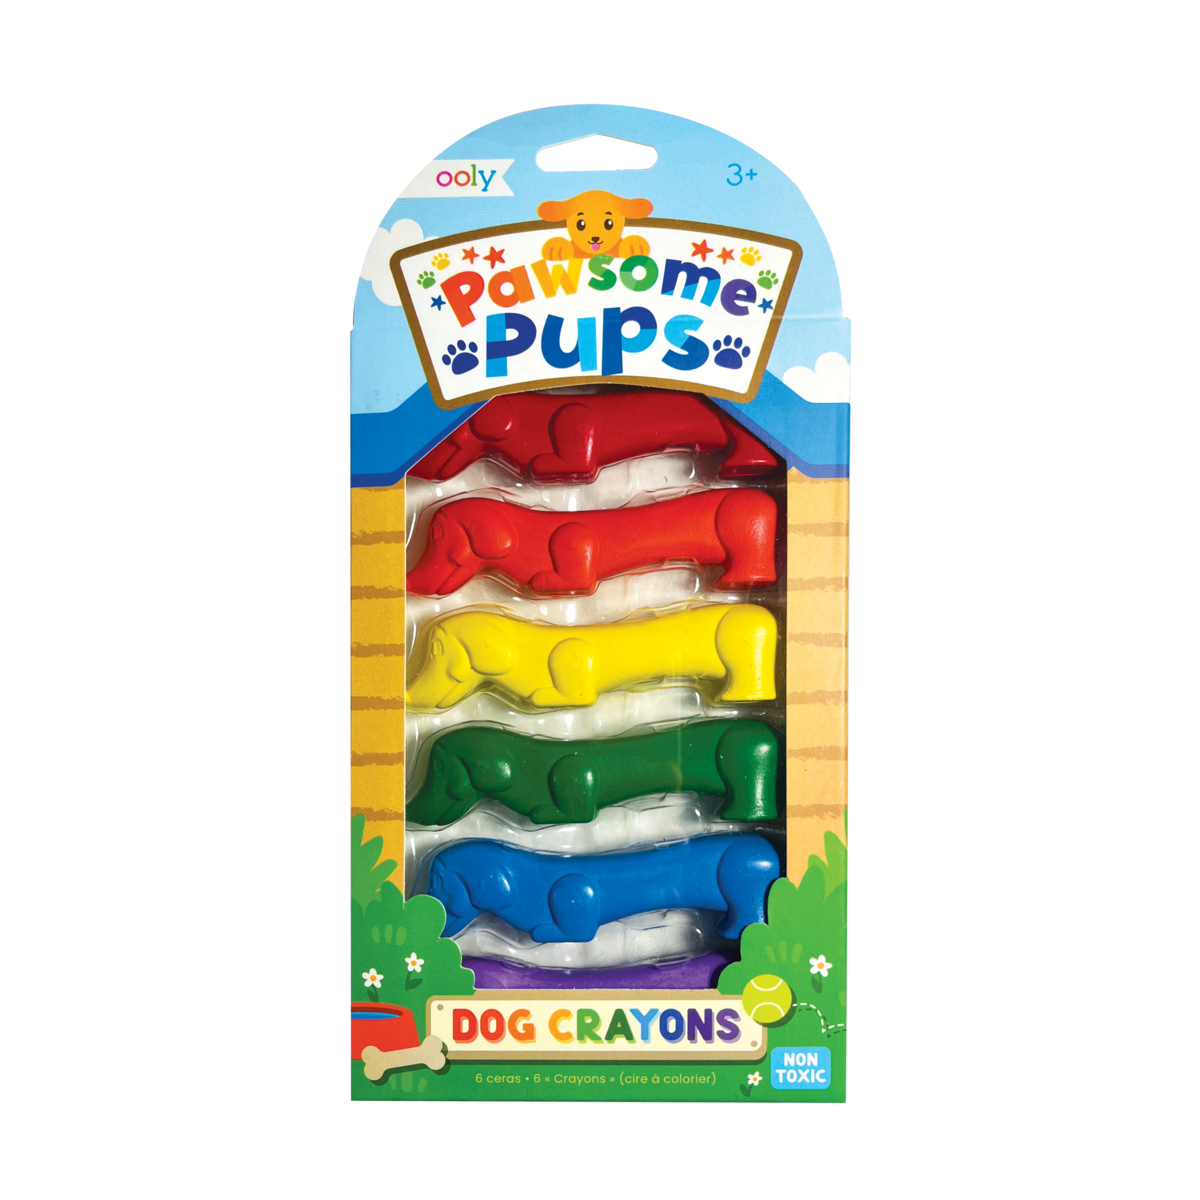 Pawsome Pups dog crayons in packaging